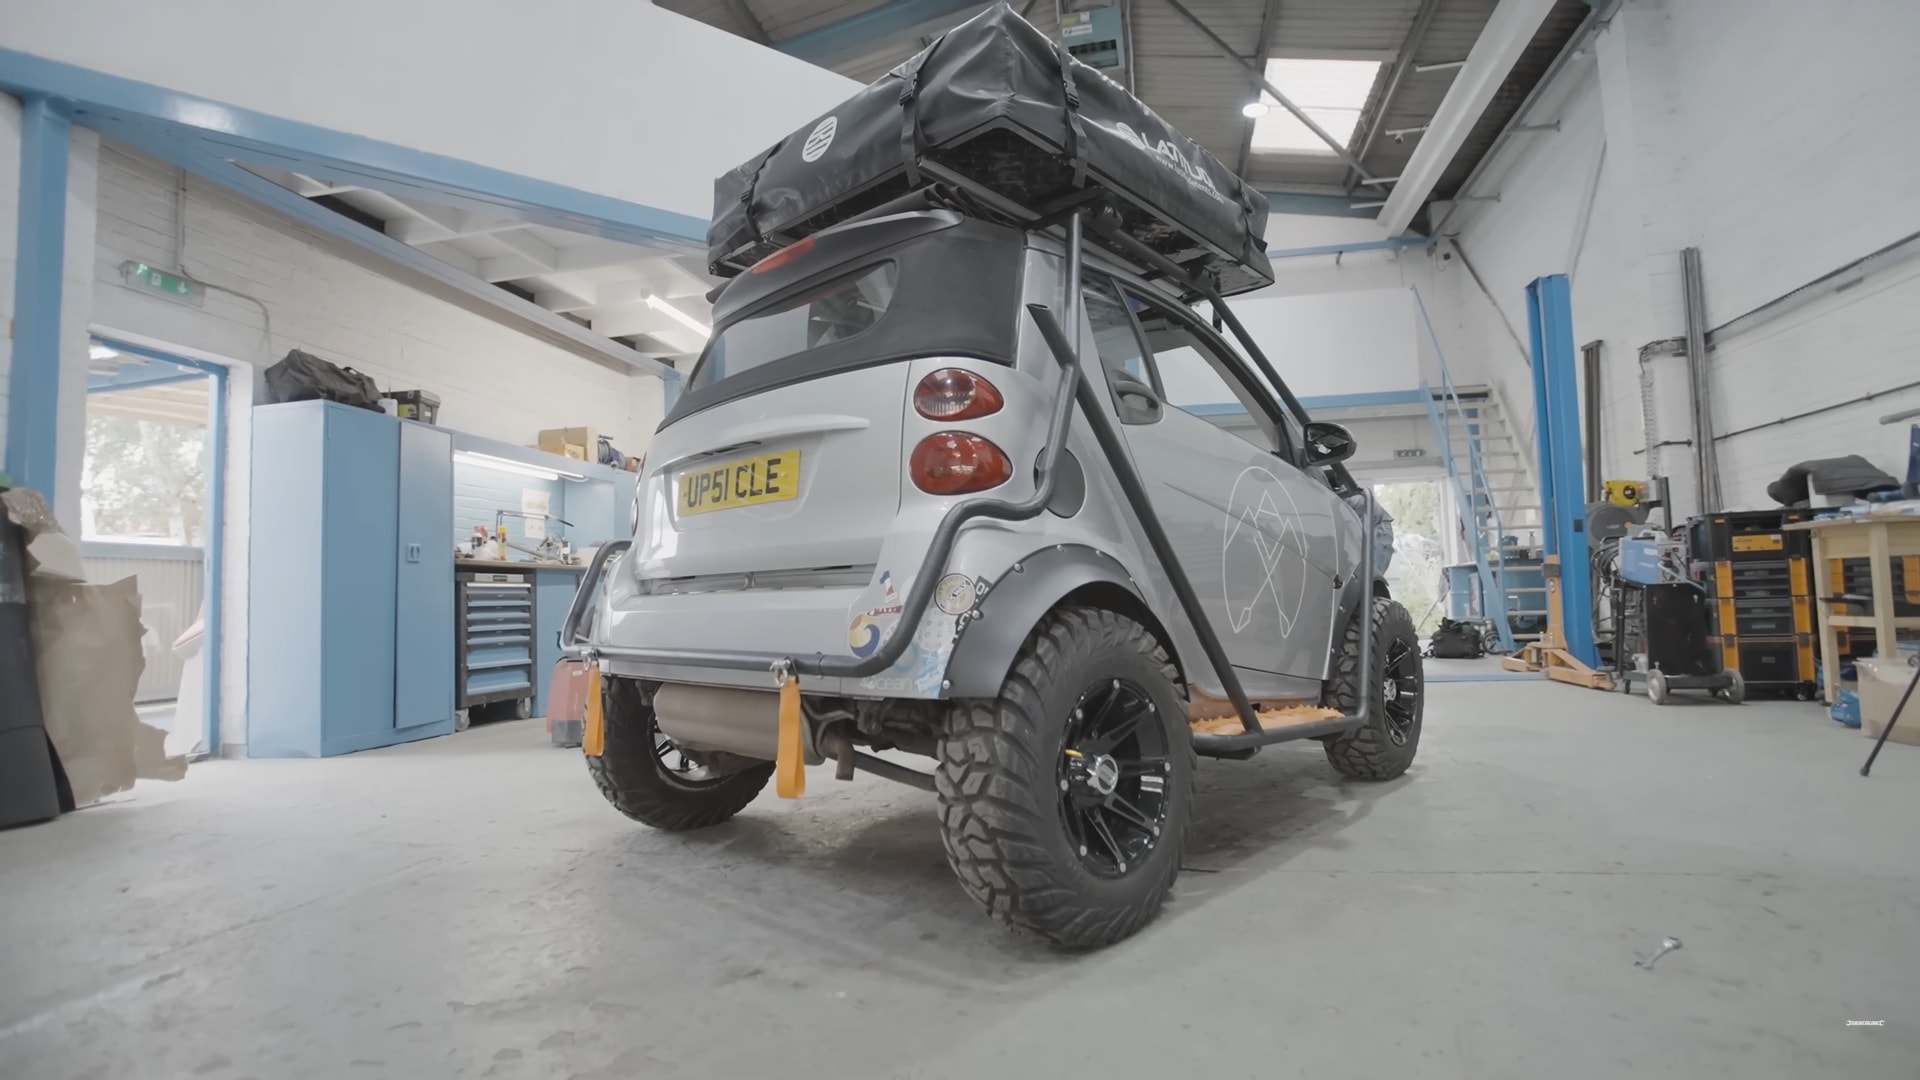 This Guy Just Converted His smart fortwo Into the World's Smallest Camper,  Literally - autoevolution